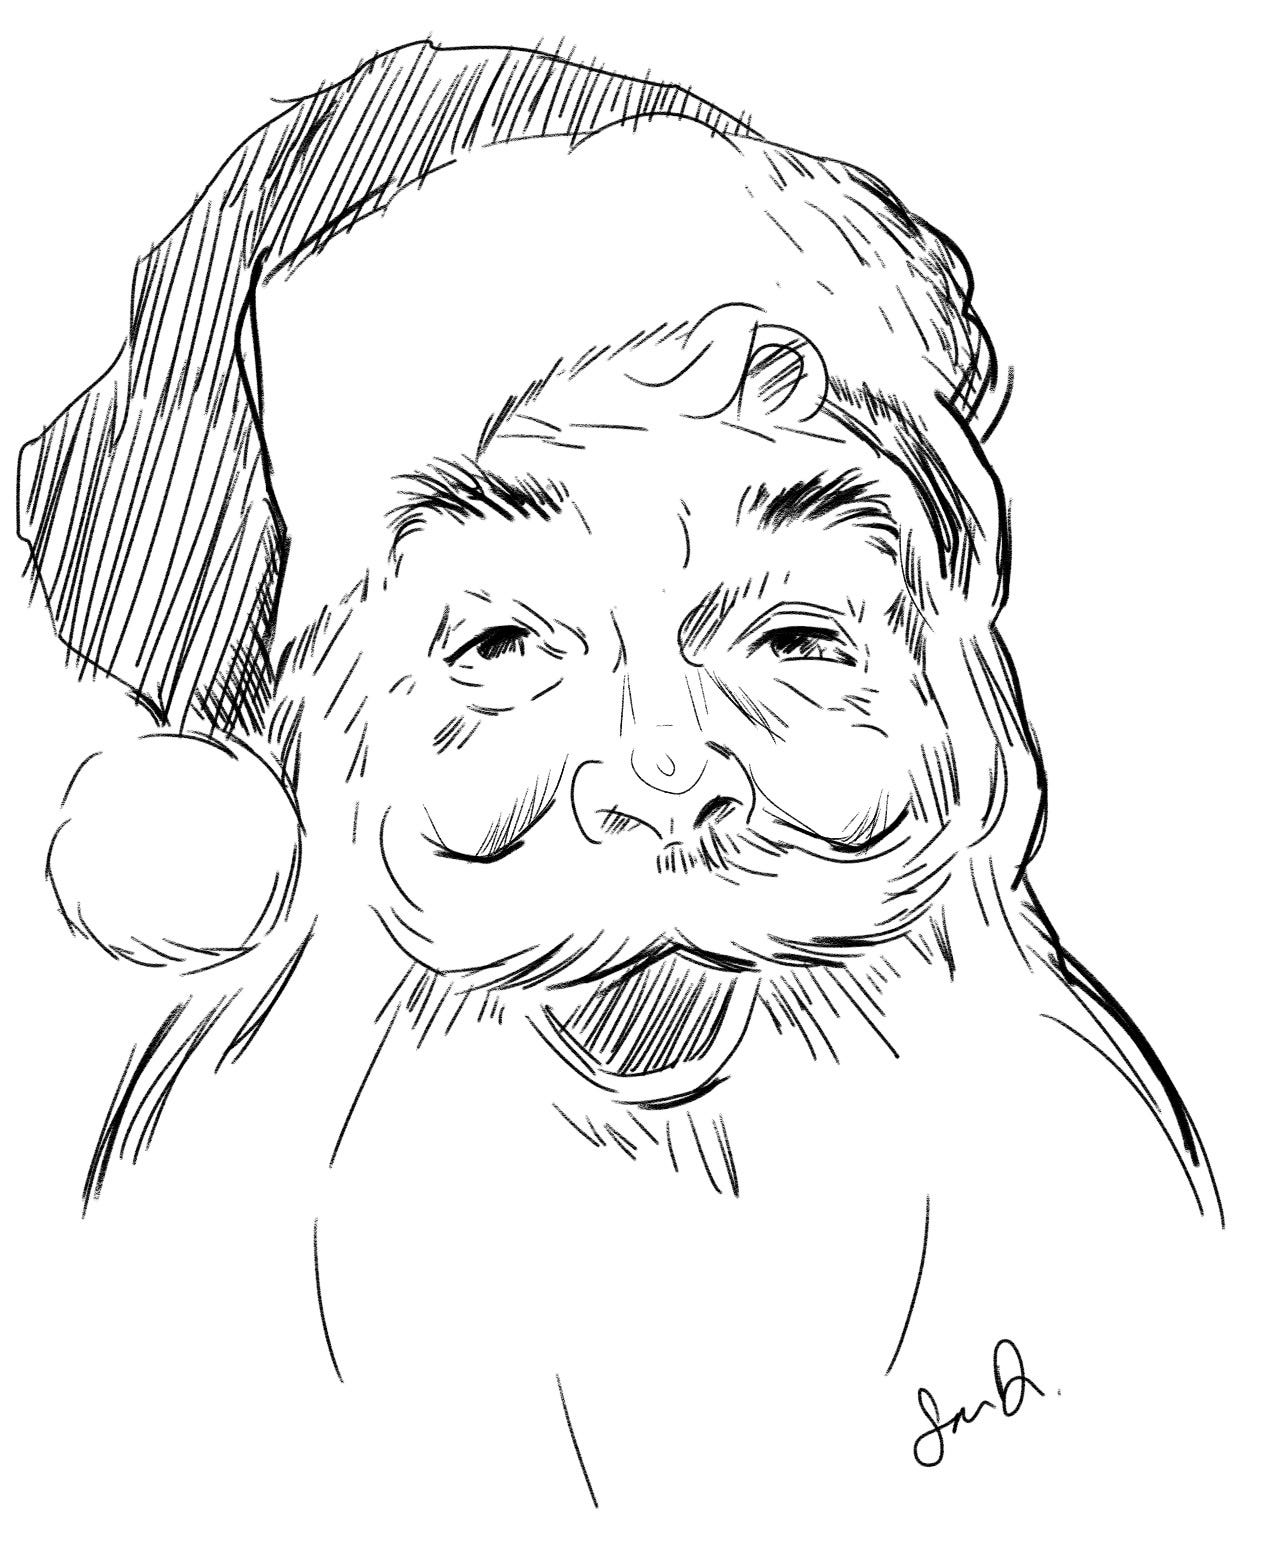 Santa Claus Original Oil Painting Face Christmas Holiday Stock Illustration  - Download Image Now - iStock